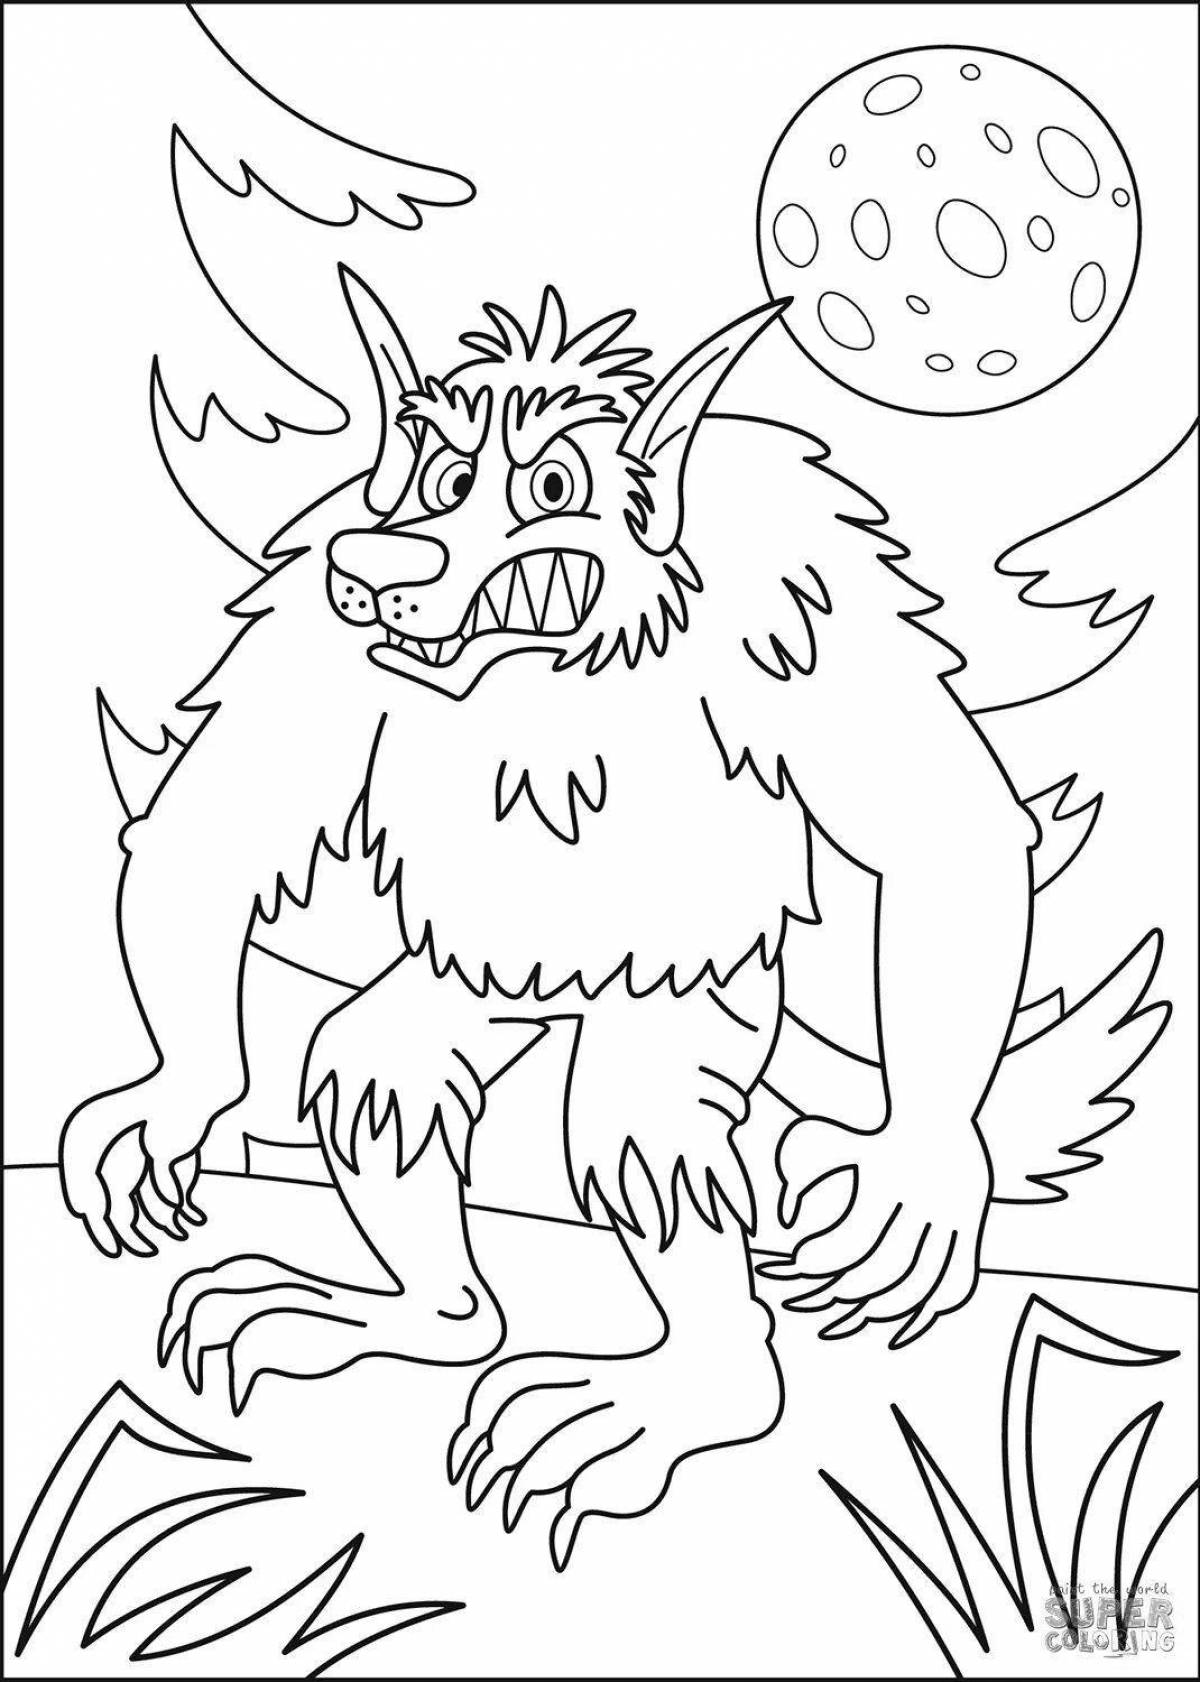 A terrible werewolf coloring book for kids